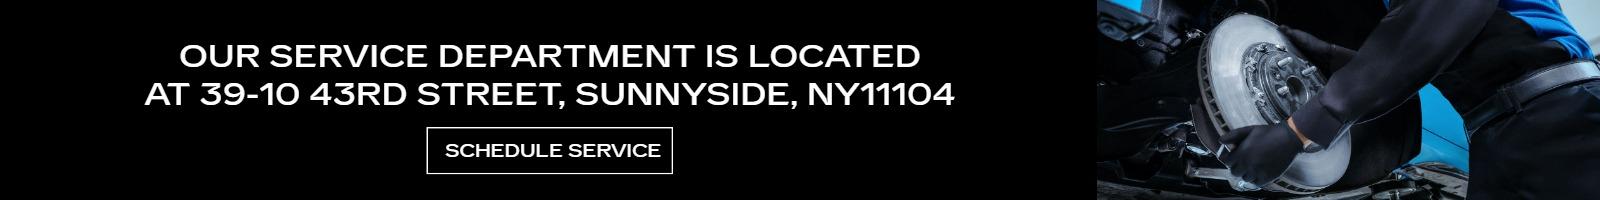 Our Service Department is located at 39-10 43rd Street, Sunnyside, NY11104